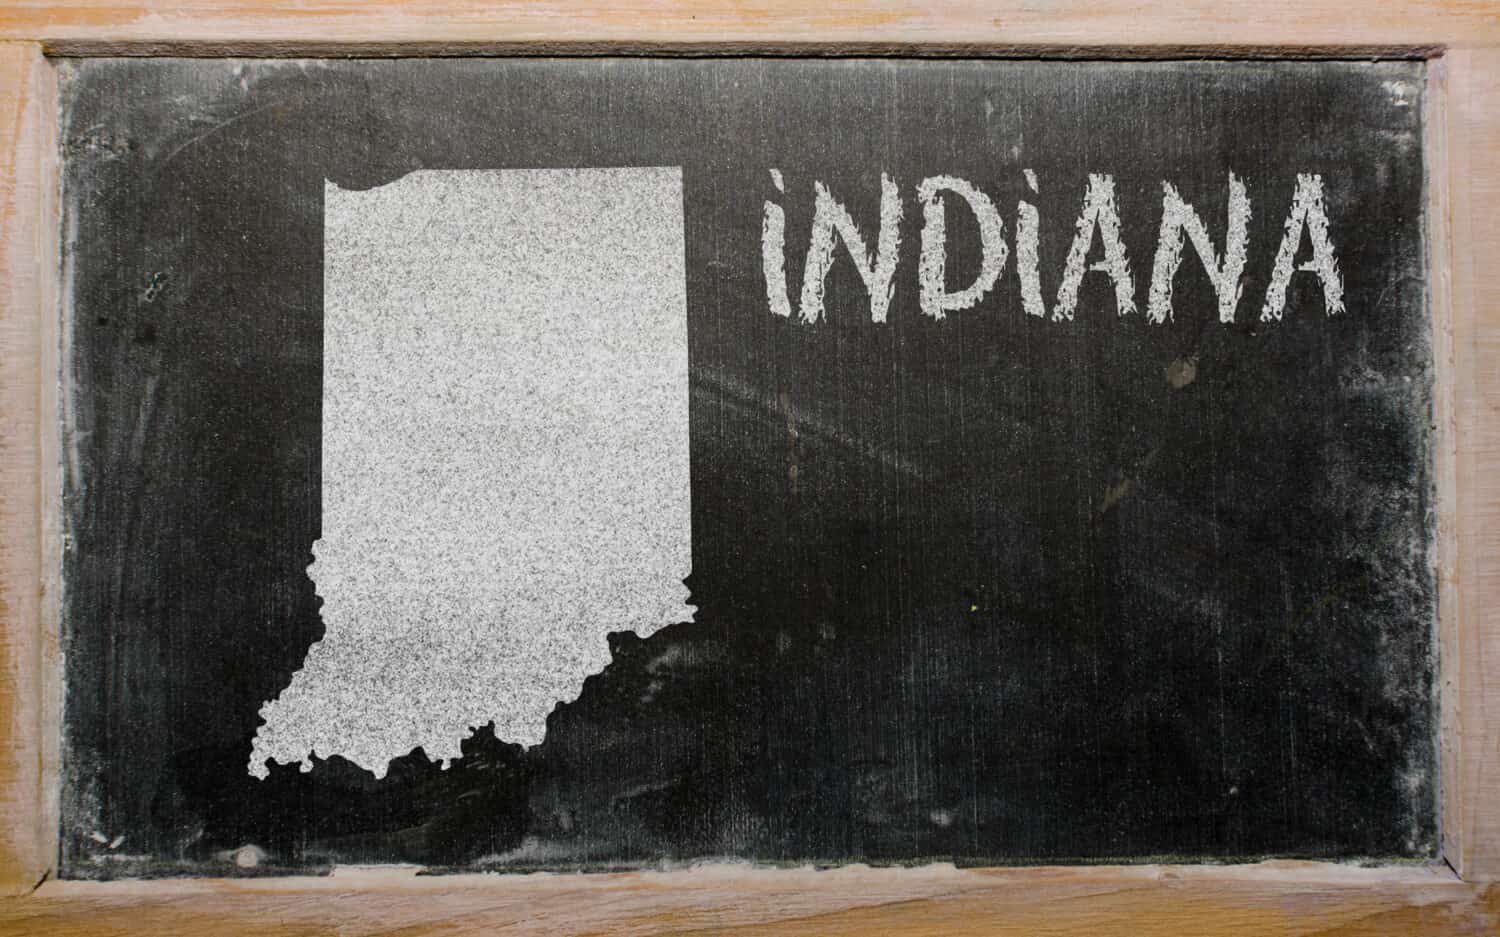 drawing of american state of indiana on chalkboard, drawn by chalk